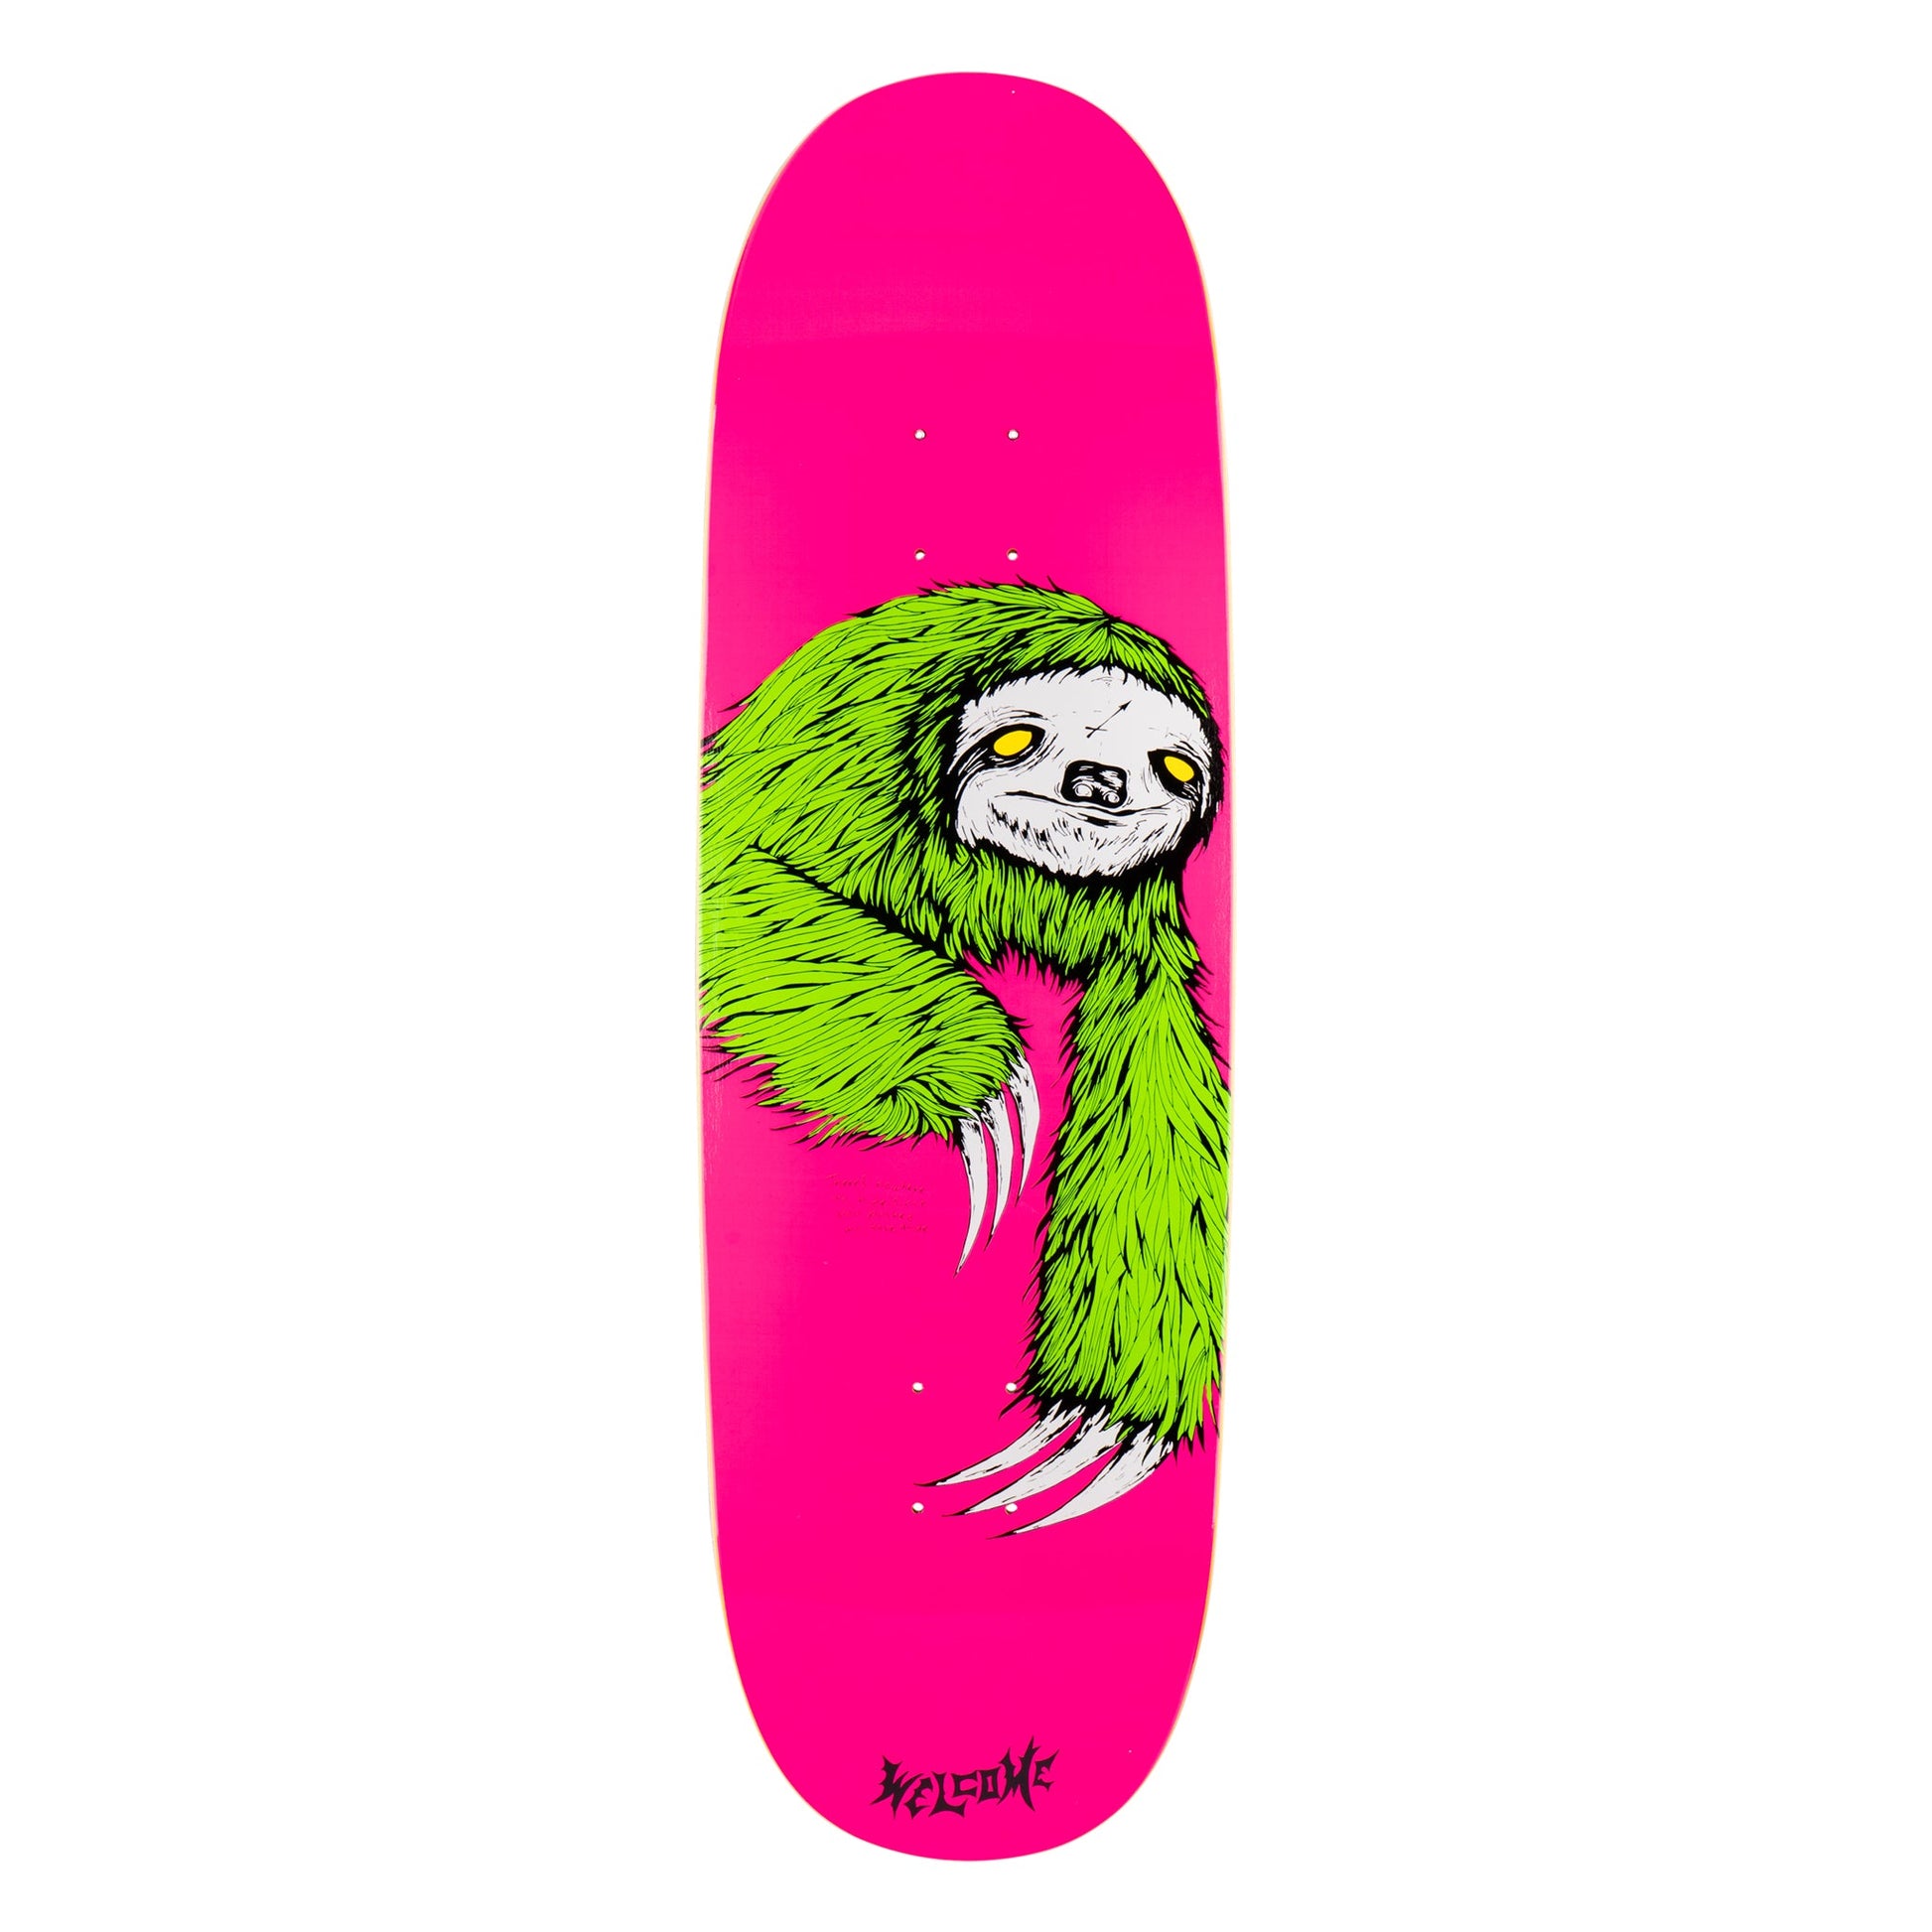 Welcome Sloth on Boline 2.0 Neon Pink Deck - 9.5" - Vault Board Shop Welcome